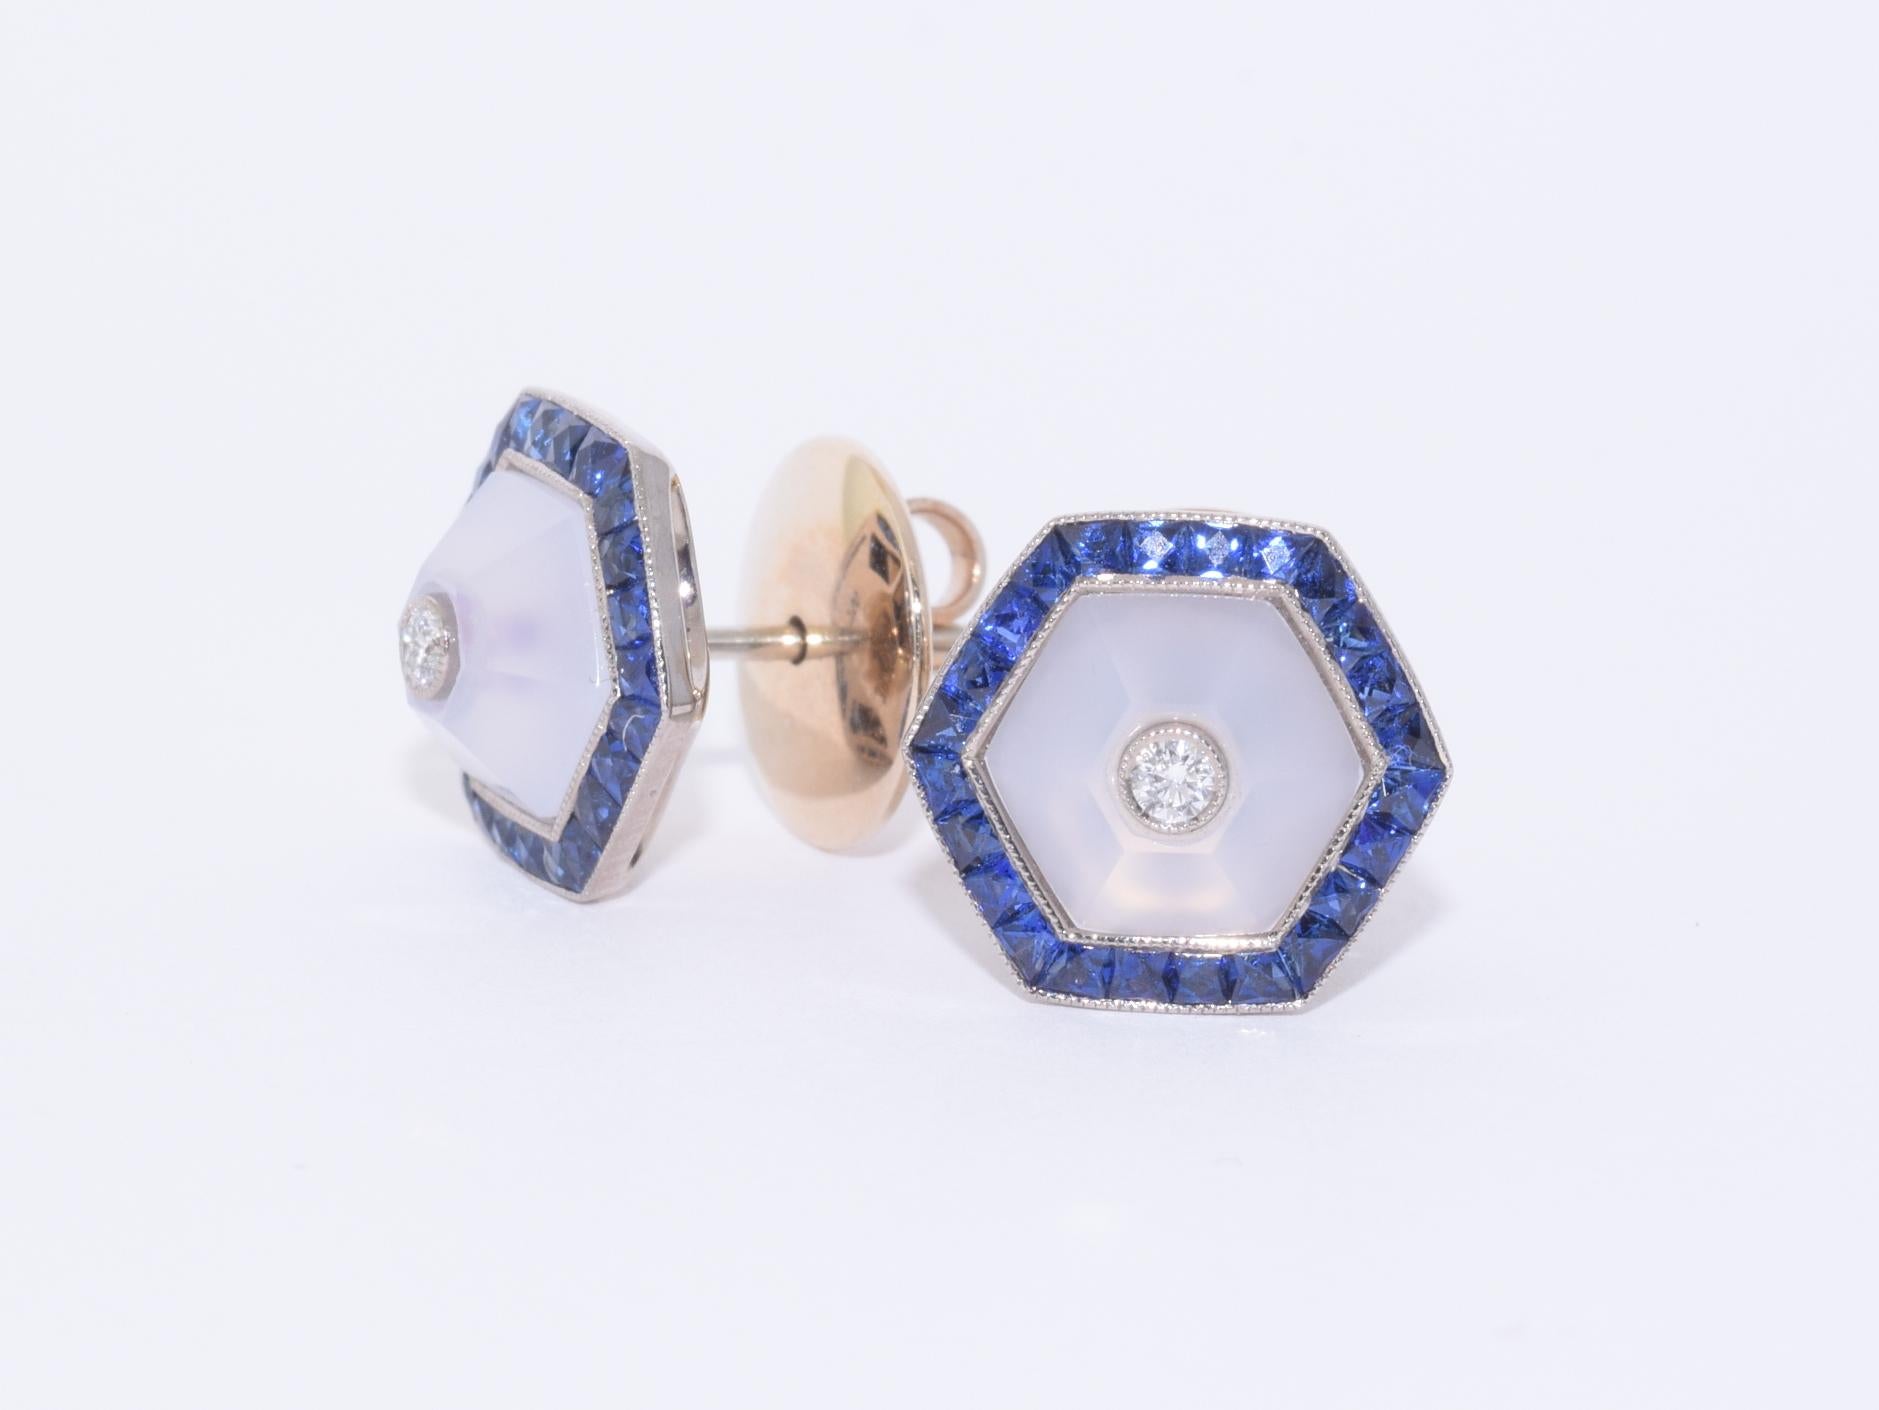 Hexagonal cut blue chalcedony is inlaid with round diamonds totaling approximately 0.05 carat and is set in a calibre sapphire surround totaling approximately 0.40 carat in an 18 karat white gold mounting. 11.9mm at widest point.

Fred Leighton is